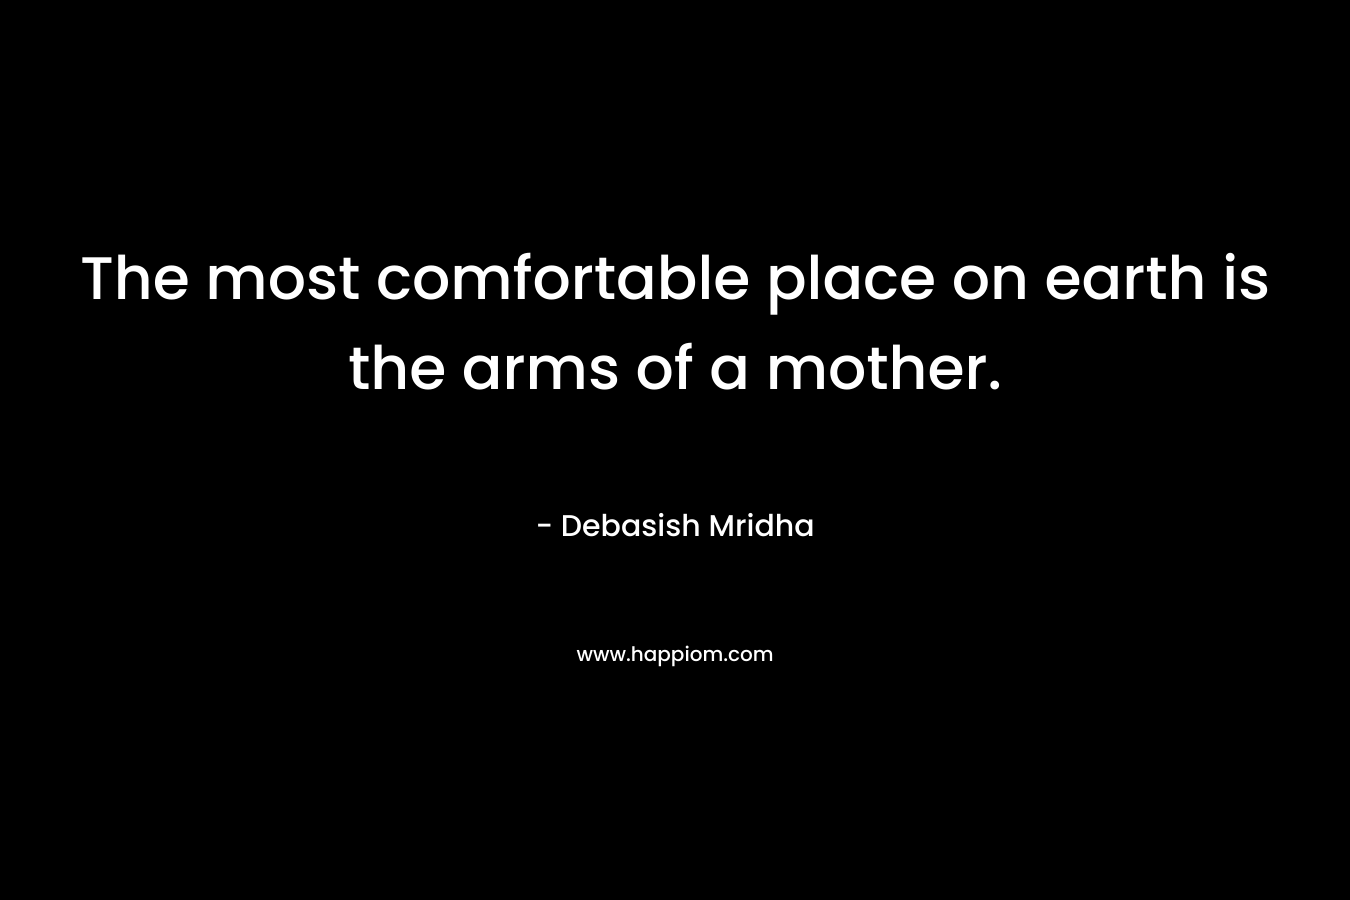 The most comfortable place on earth is the arms of a mother.